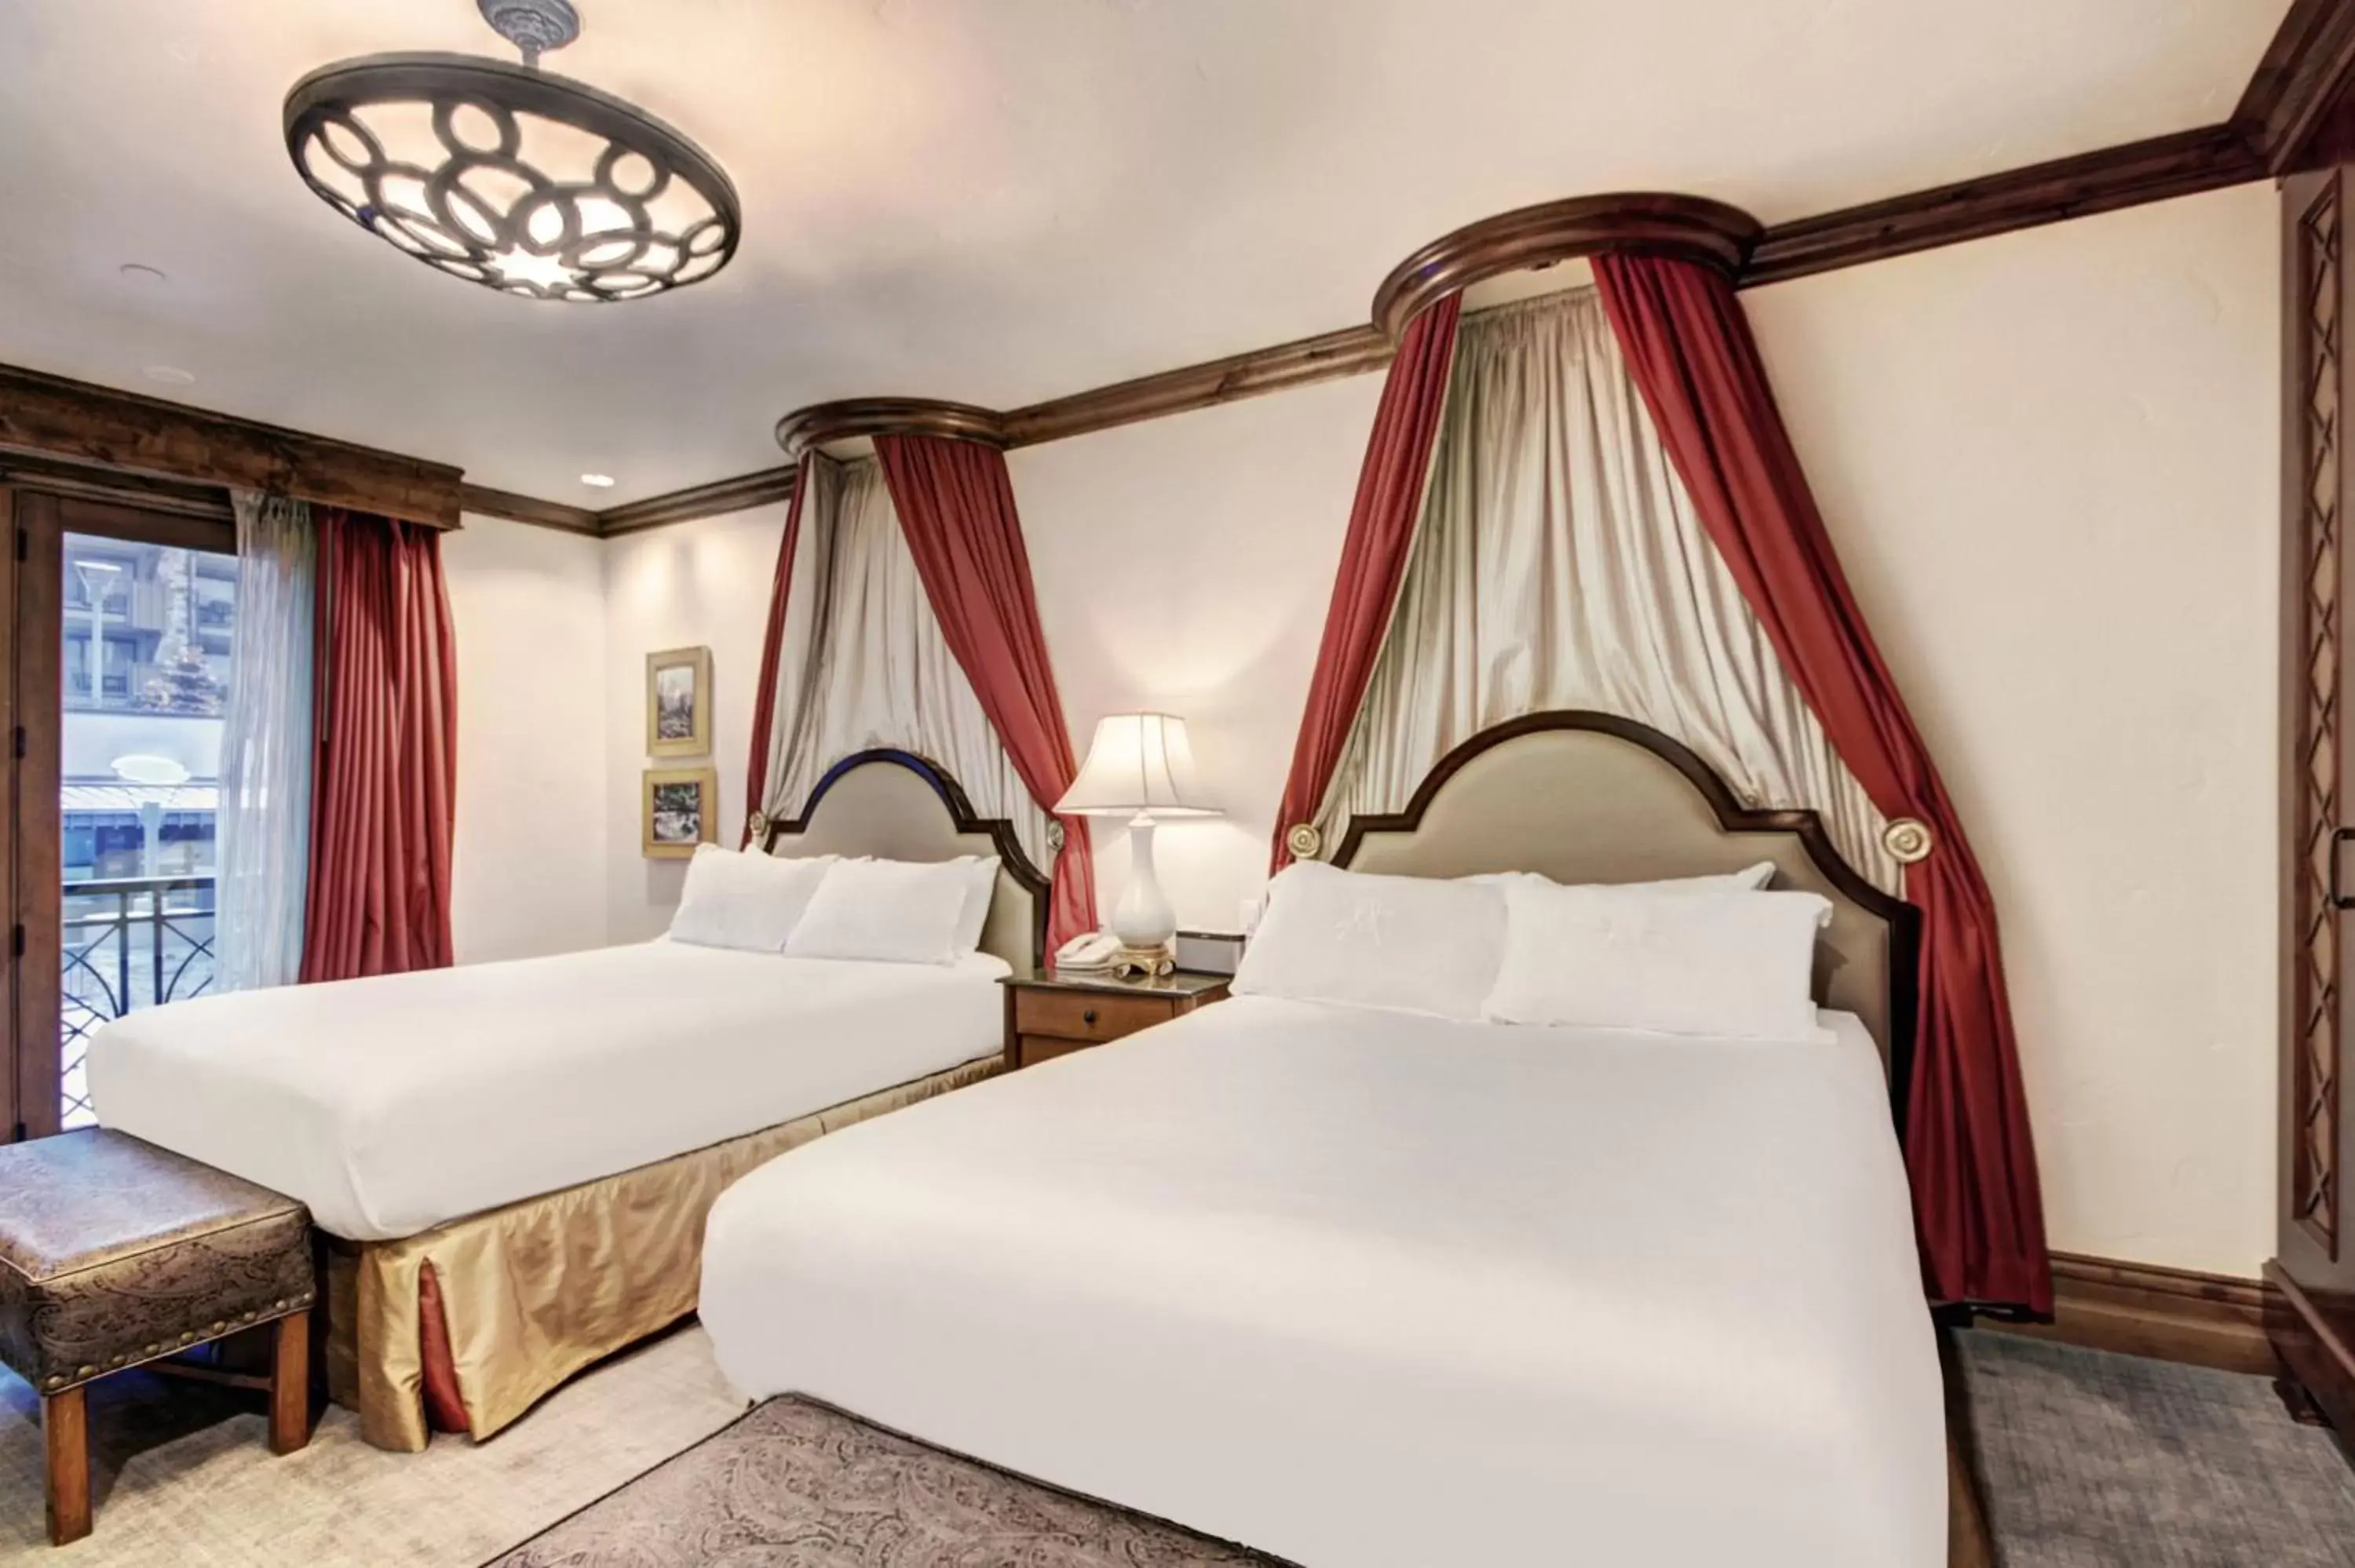 Superior Queen Room with Two Queen Beds in The Arrabelle at Vail Square, a RockResort